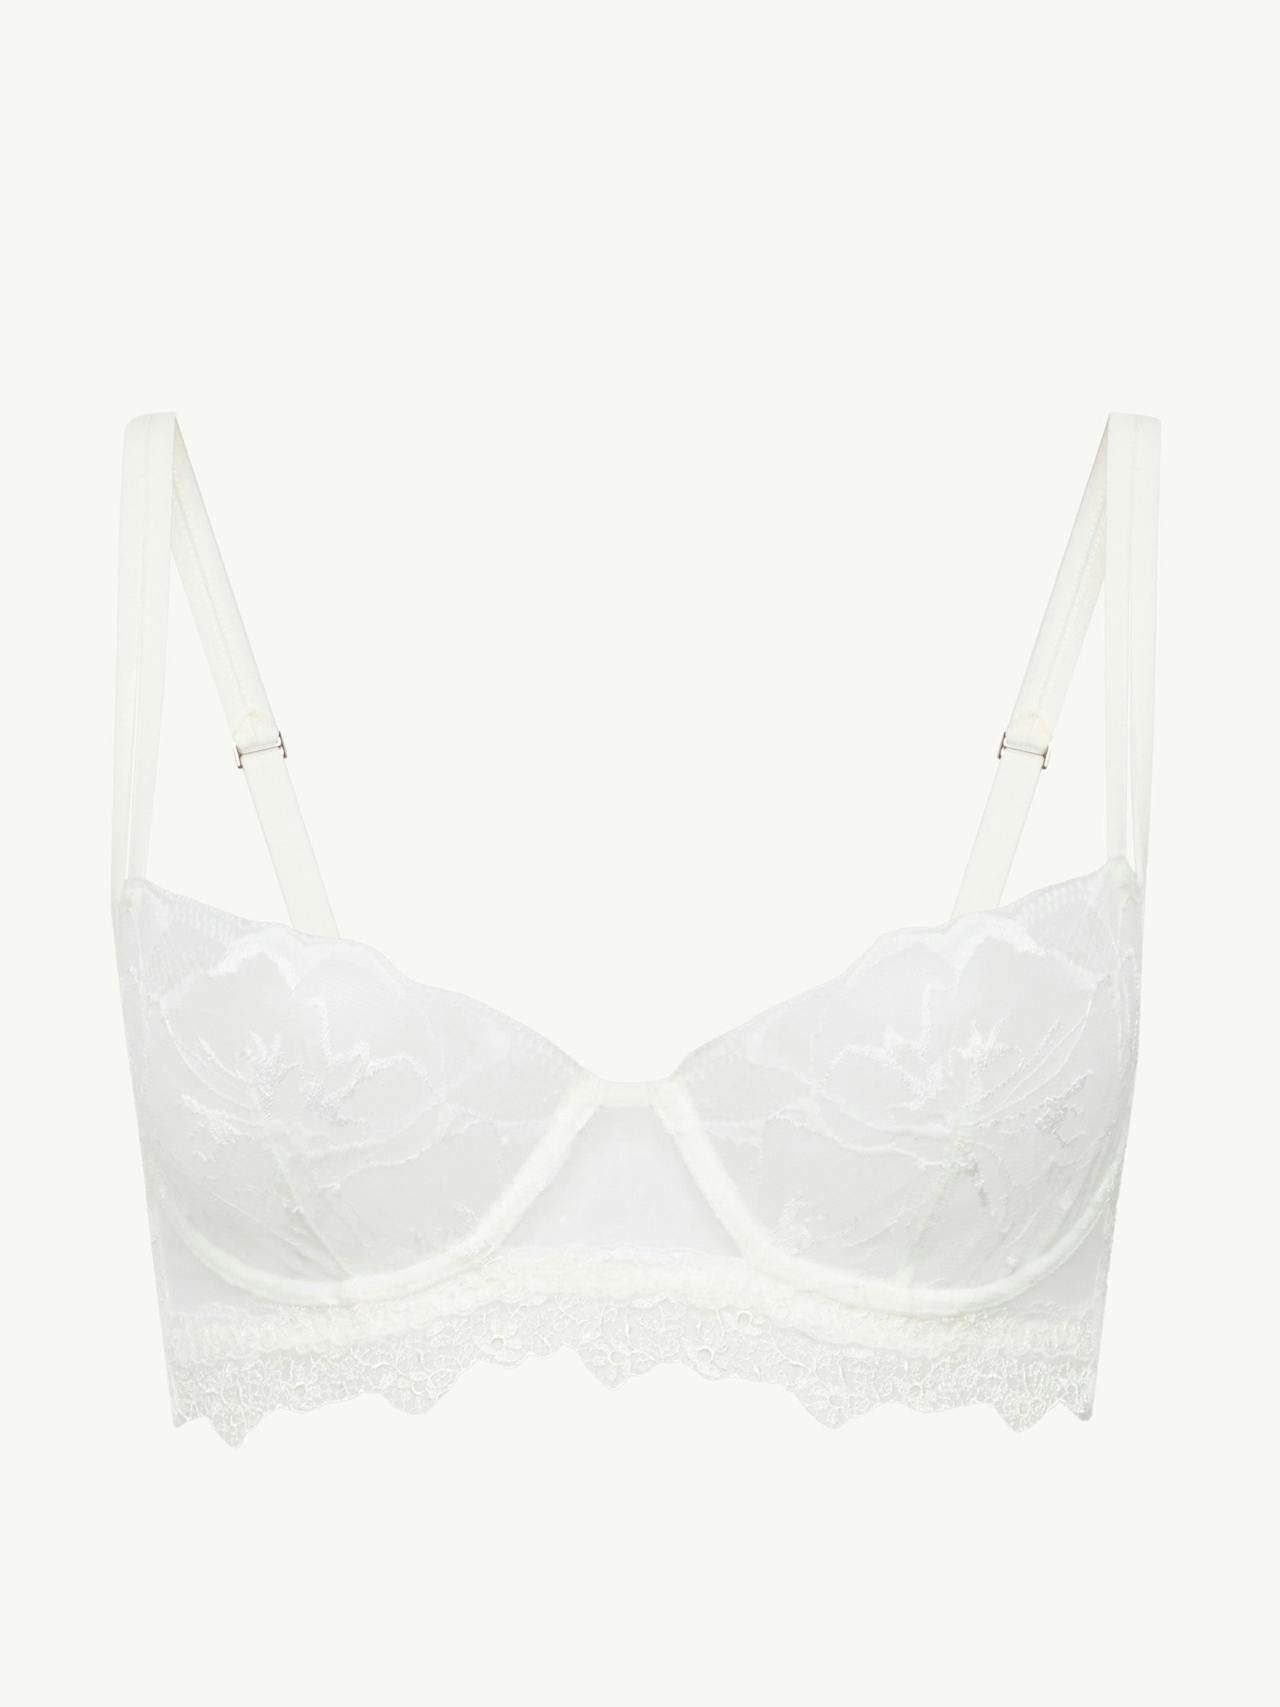 Balconette bra in off white with leavers lace